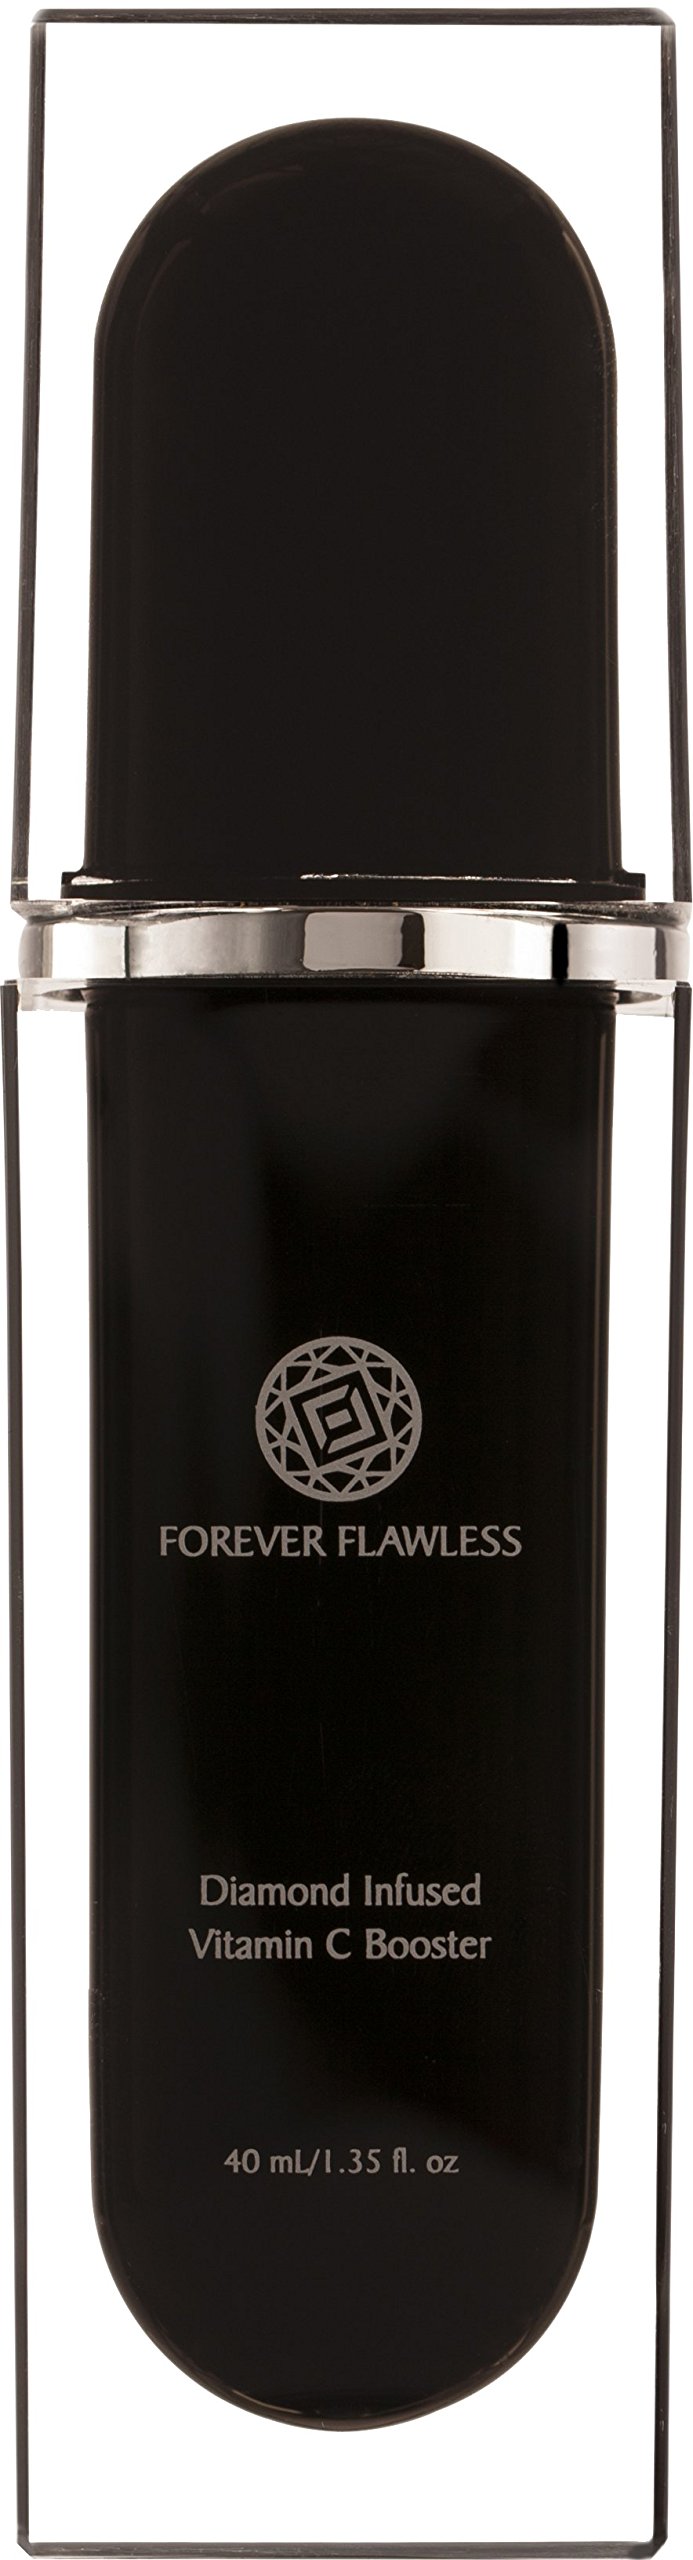 Forever Flawless Diamond Infused Vitamin C Booster with 100% Natural White Diamond Infused Powder, Anti-Aging Ingredients Designed to Diminish Fine Lines and Wrinkles FF44 (1.35 oz)